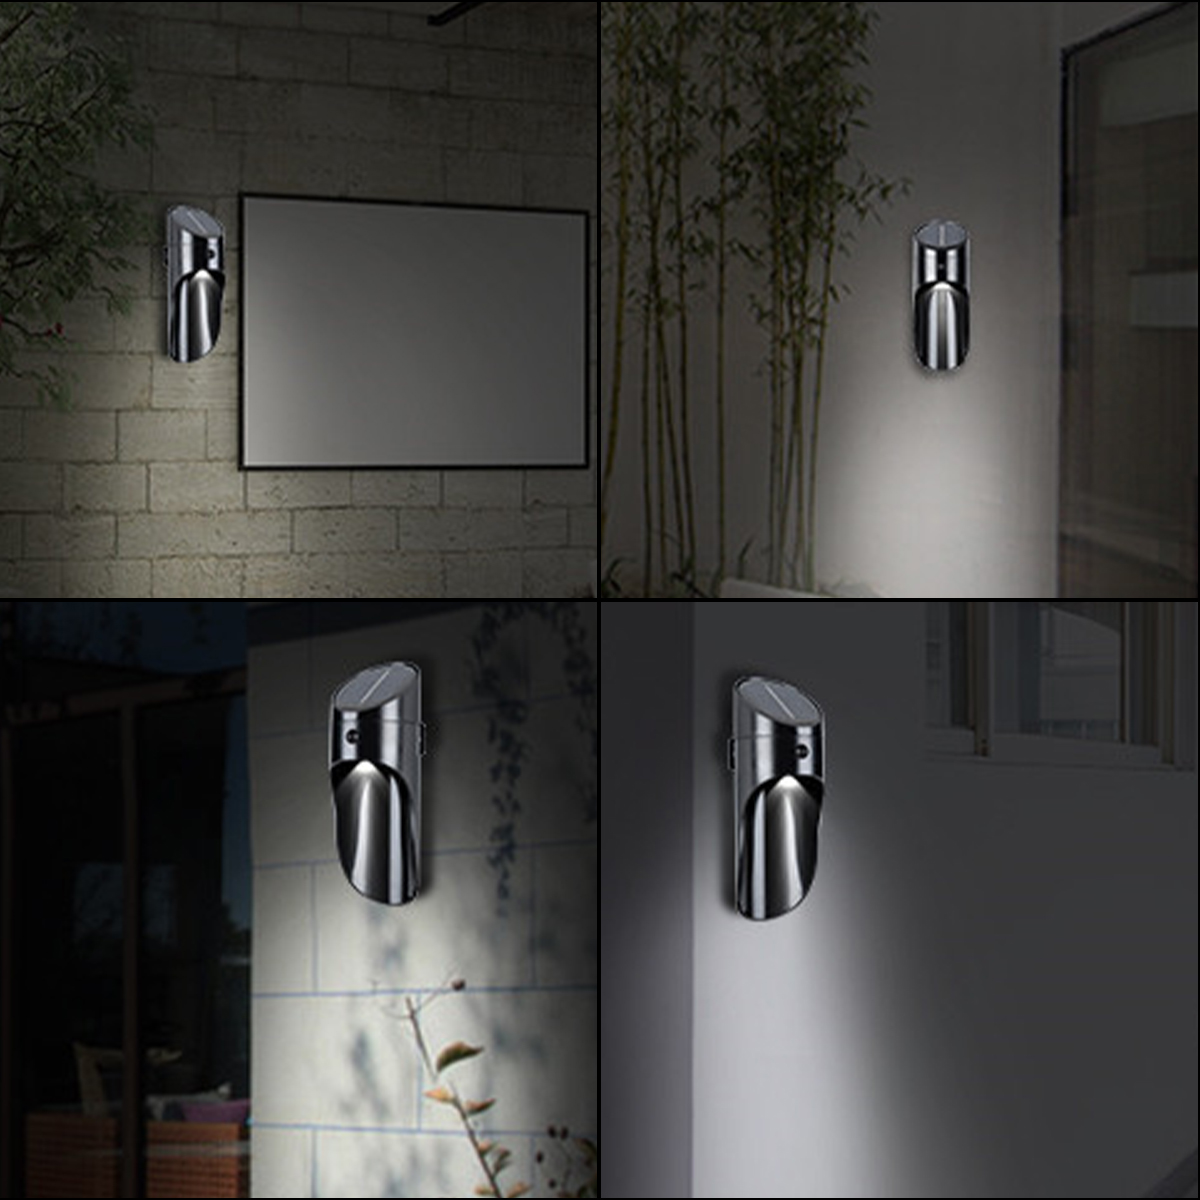 Bakeey Human Body Induction LED Solar Charging Indoor Outdoor Wall Lamps 